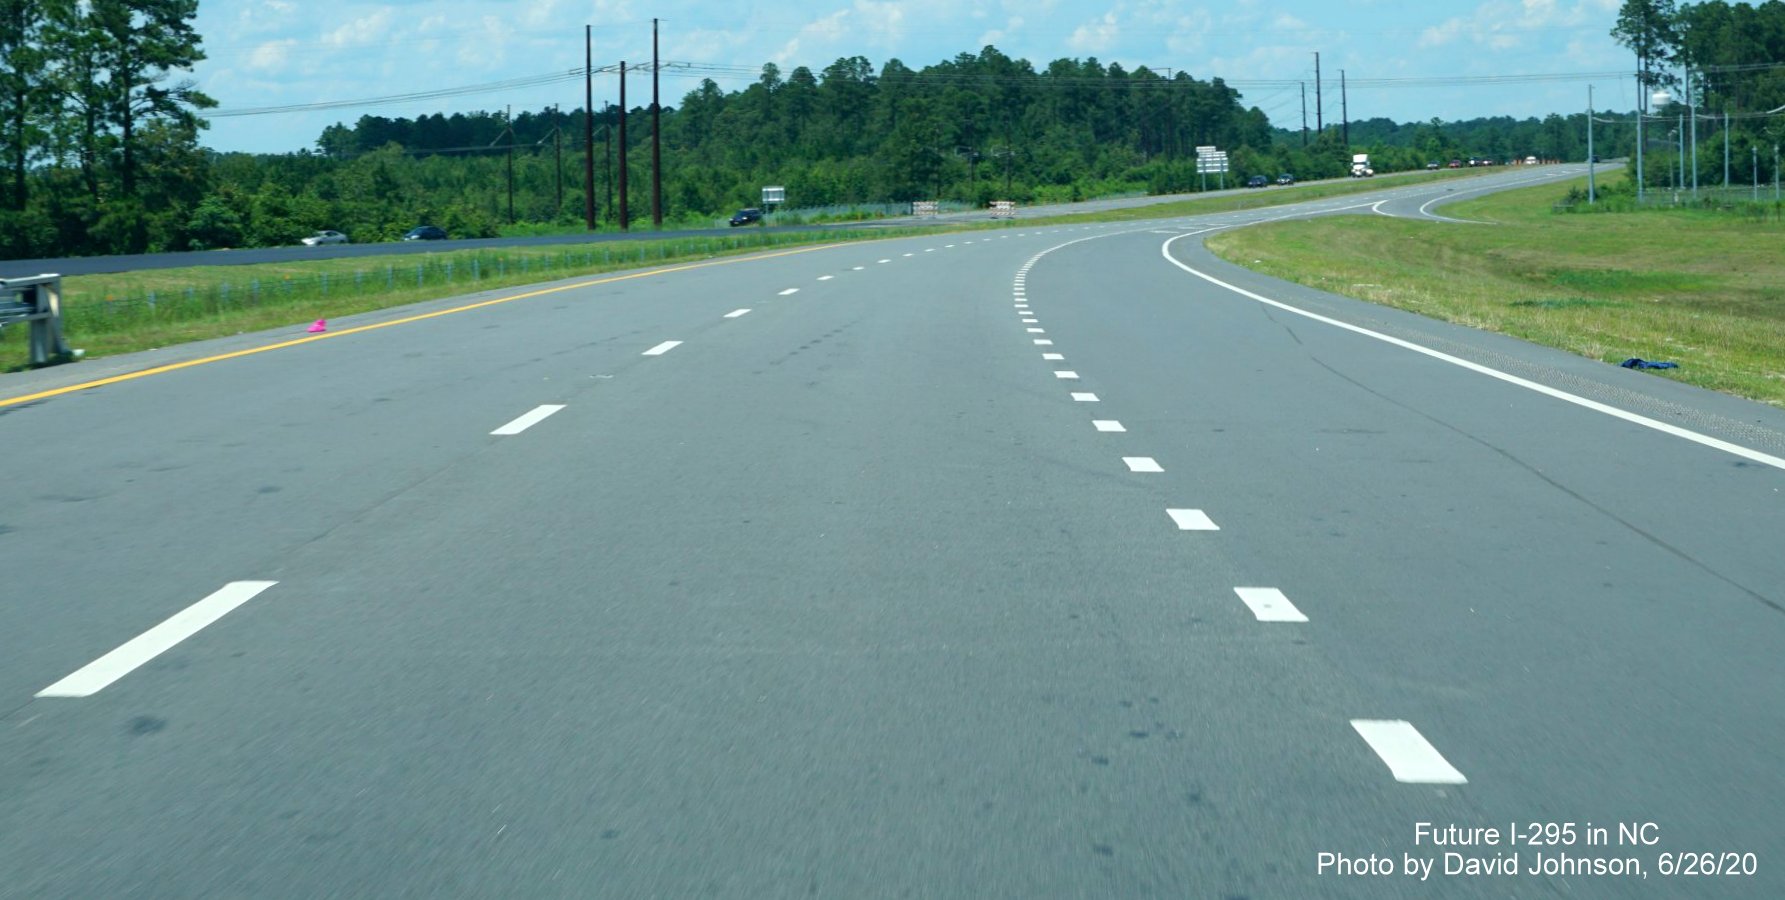 Image of NC 295 (Future I-295) North lanes after ramp from Cliffdale Road, by David Johnson, June 2020